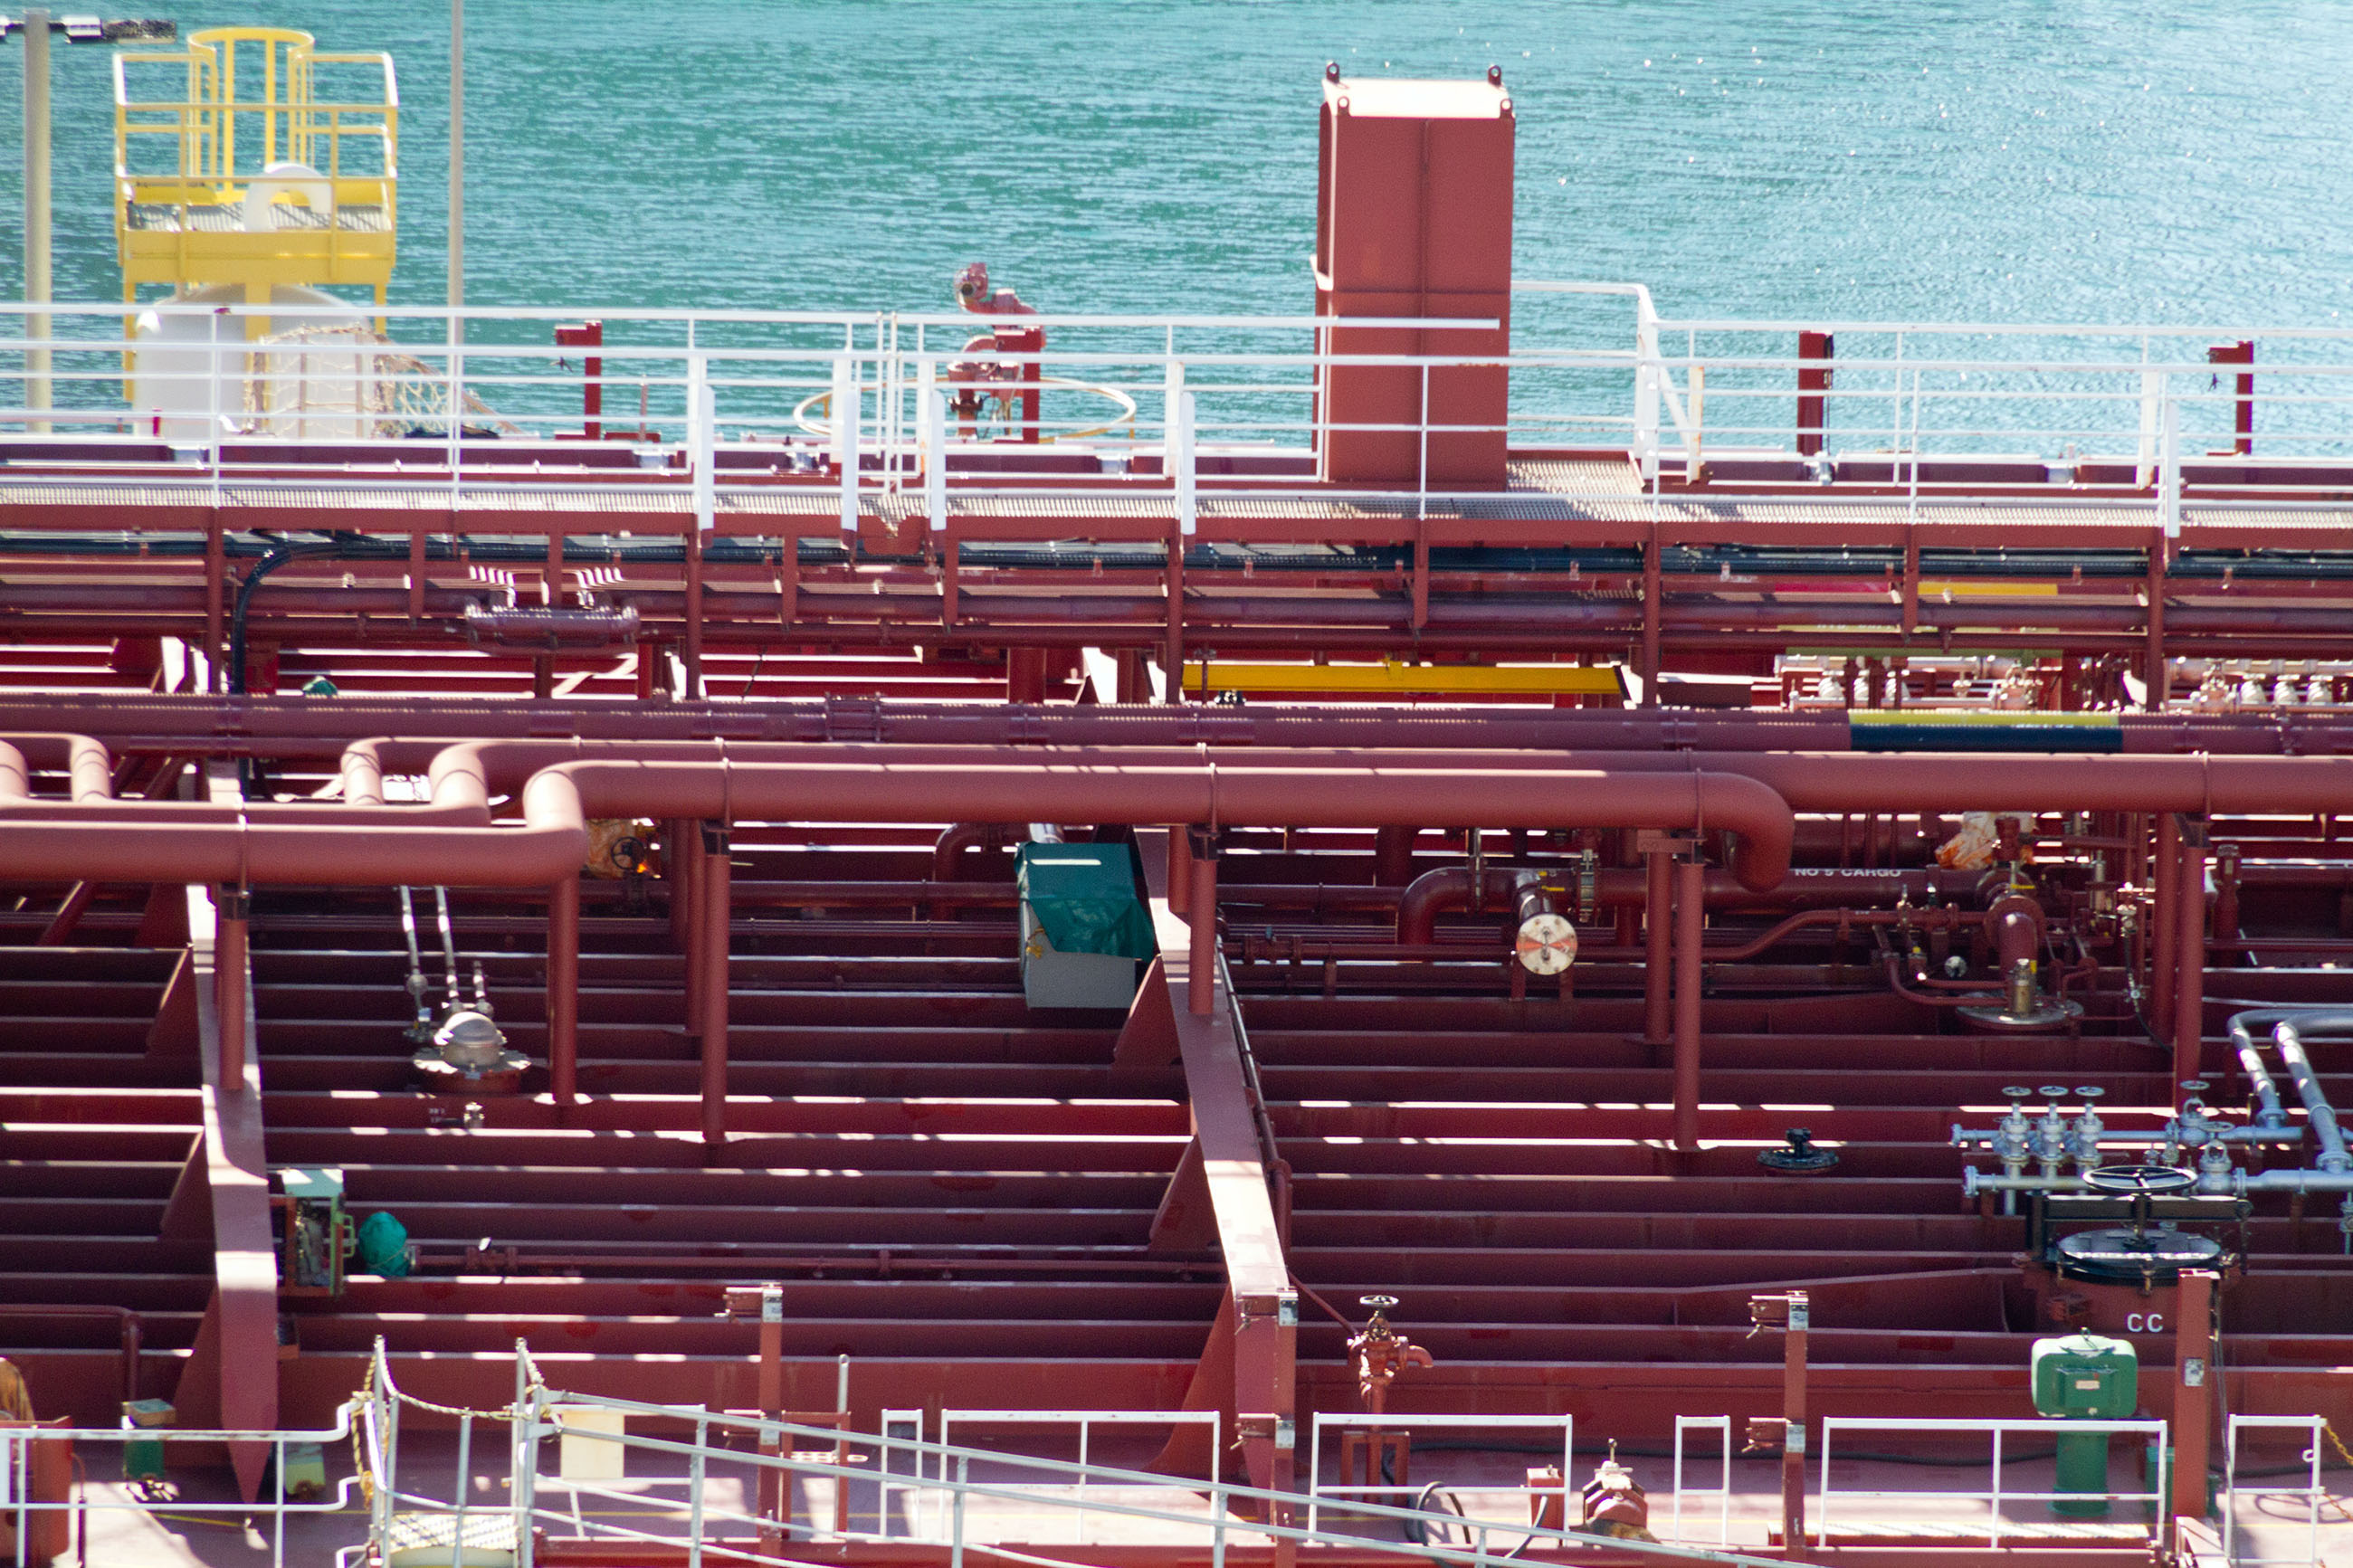 Piping on the deck of an oil tanker photo